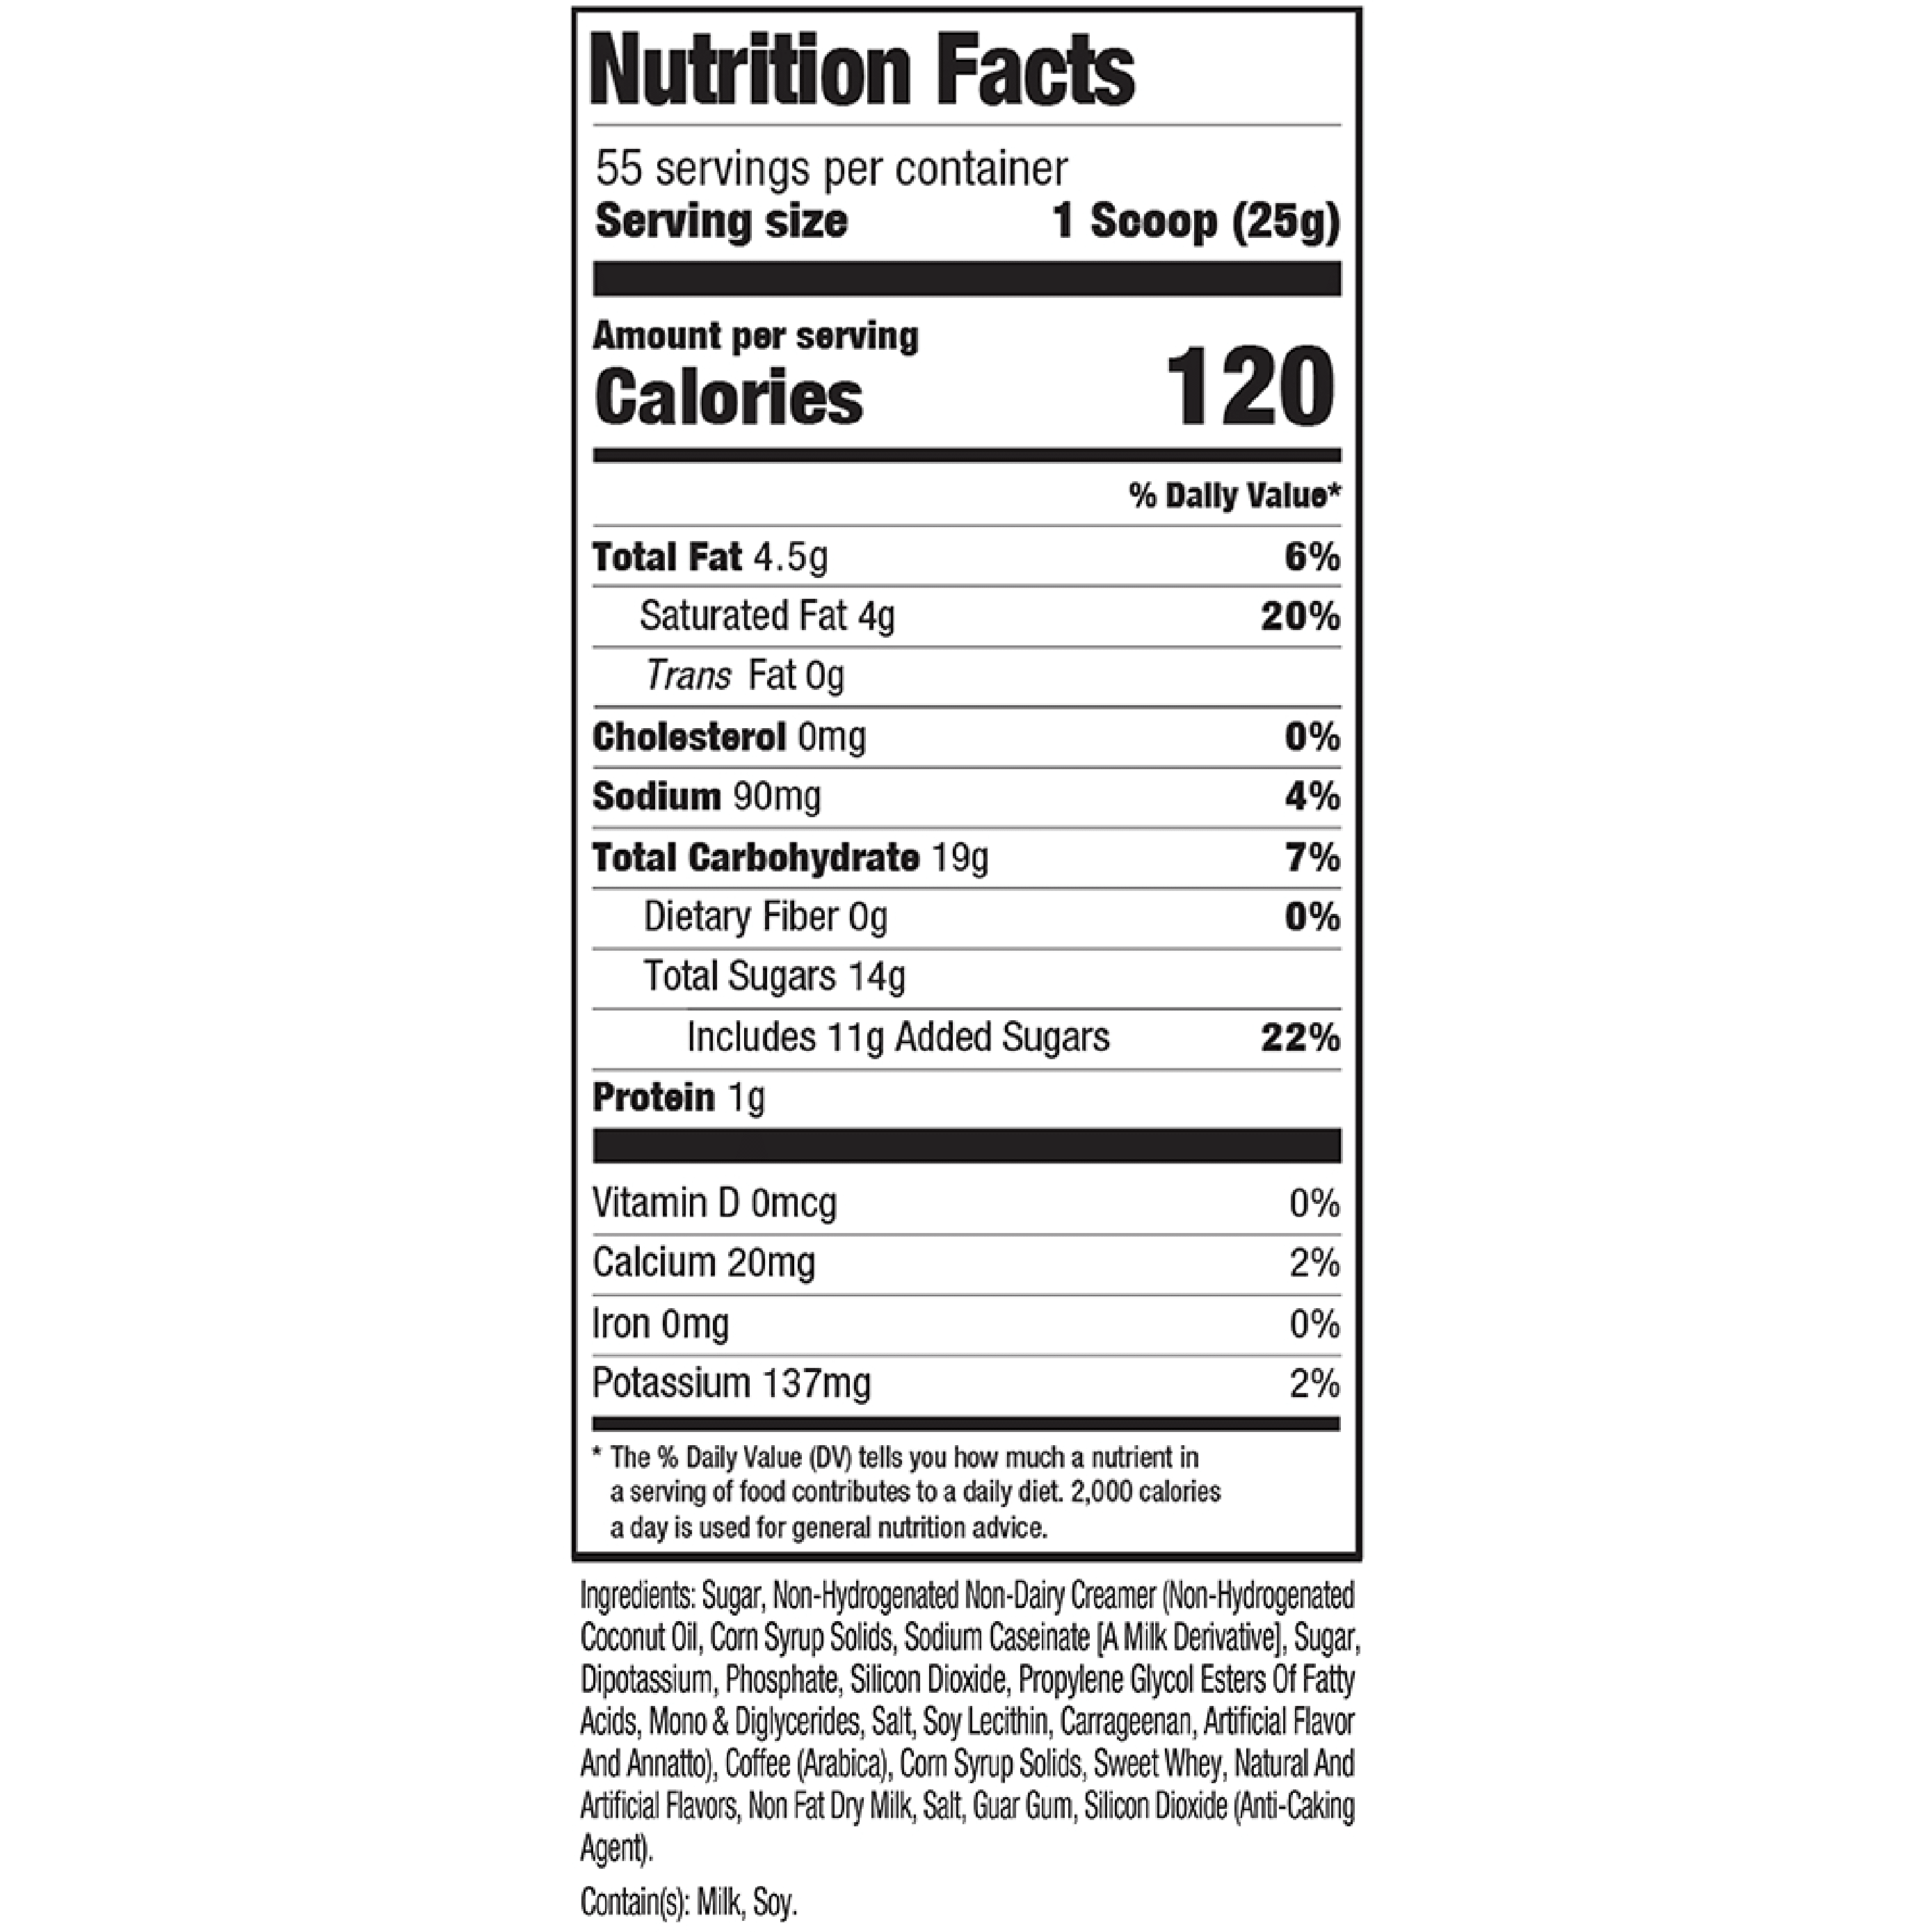 Calories in 1 coffee cup of Caffe Macchiato and Nutrition Facts